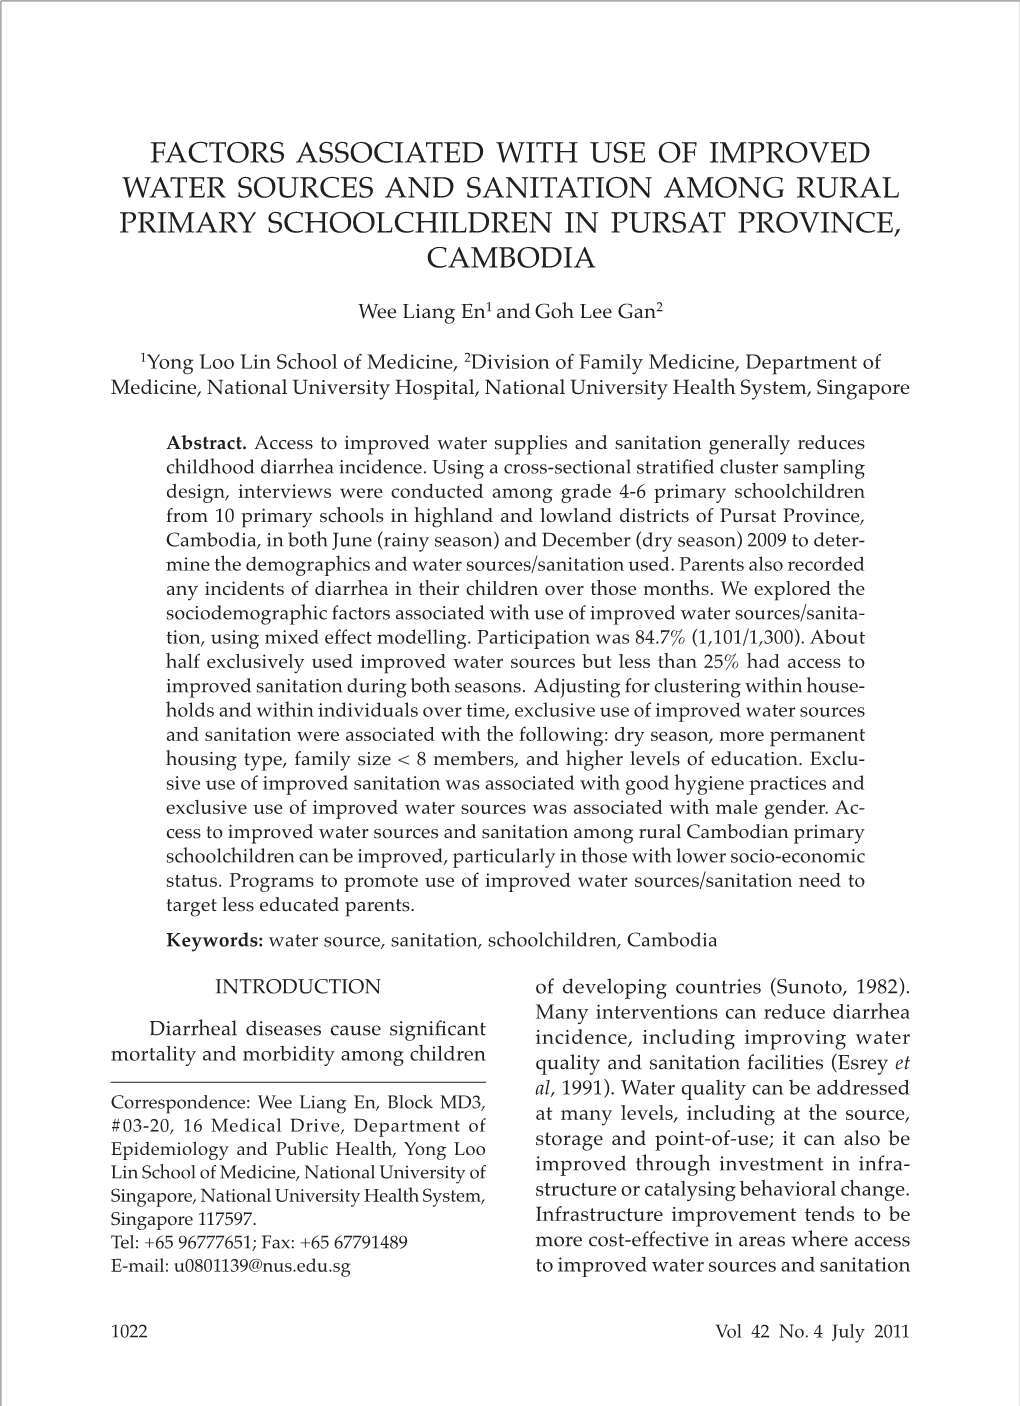 Factors Associated with Use of Improved Water Sources and Sanitation Among Rural Primary Schoolchildren in Pursat Province, Cambodia